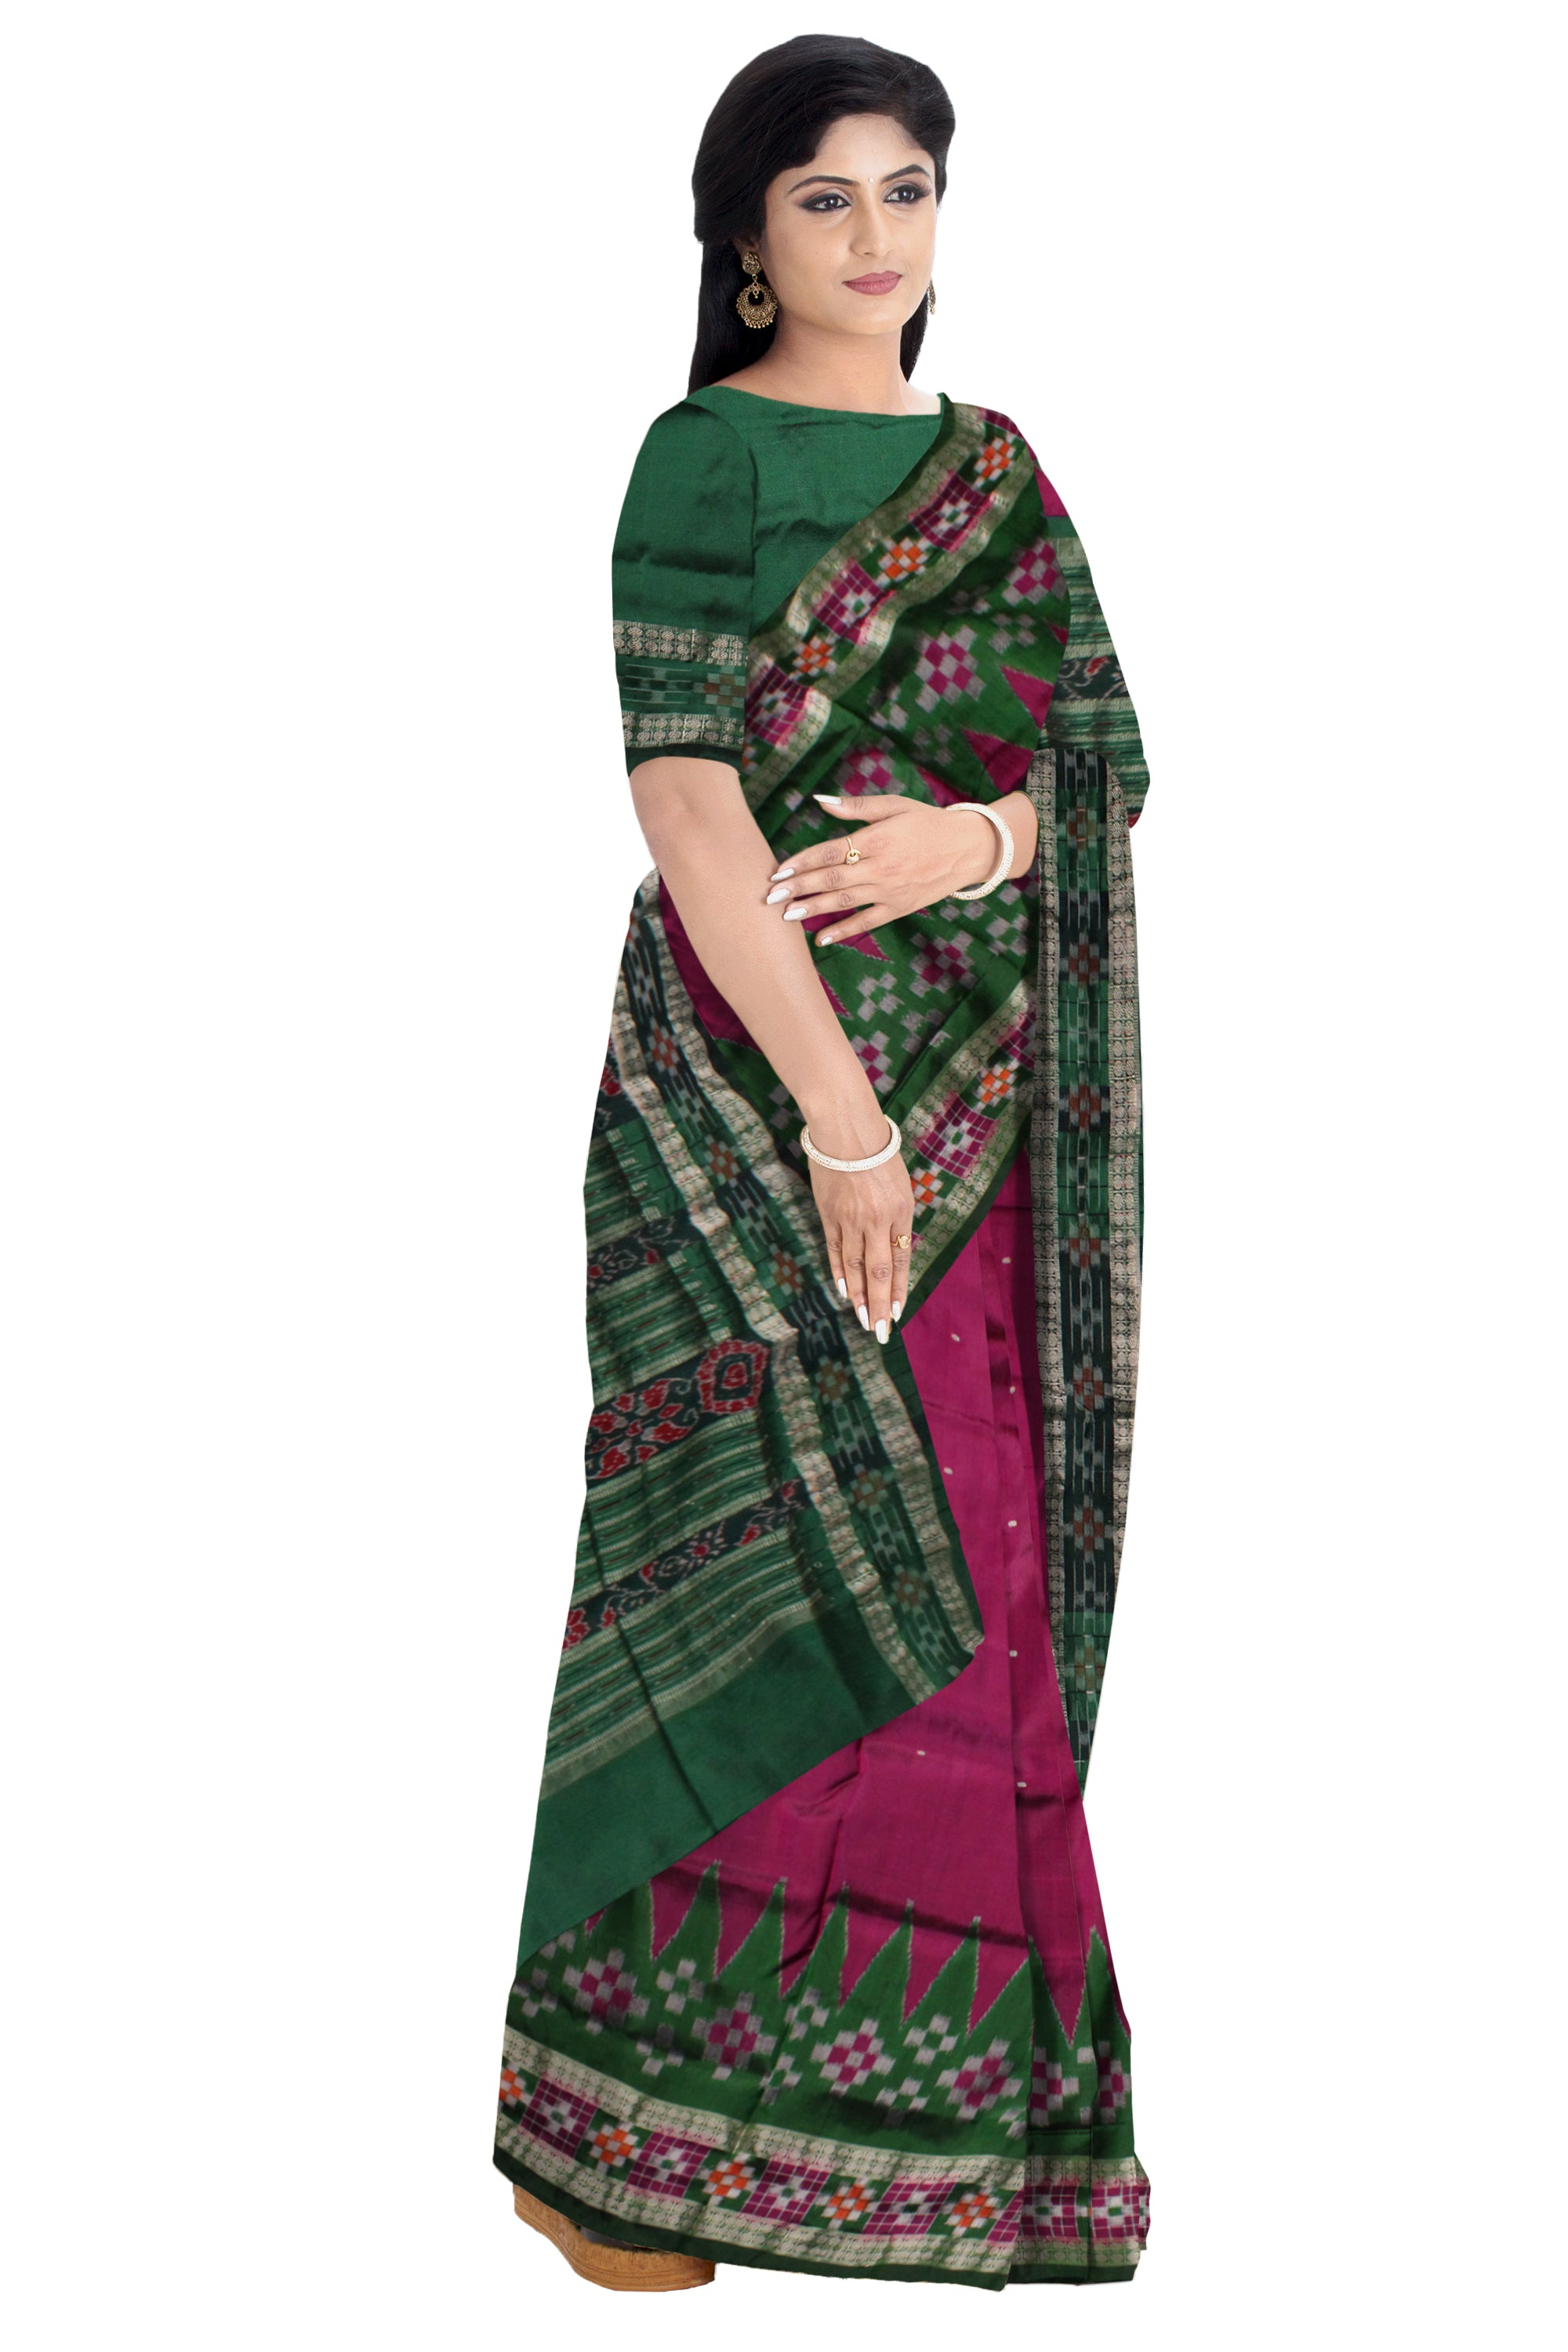 TRADITIONAL DHADI PASAPALI PATTERN PATA SAREE IS PINK AND GREEN COLOR BASE,COMES WITH MATCHING BLOUSE PIECE. - Koshali Arts & Crafts Enterprise